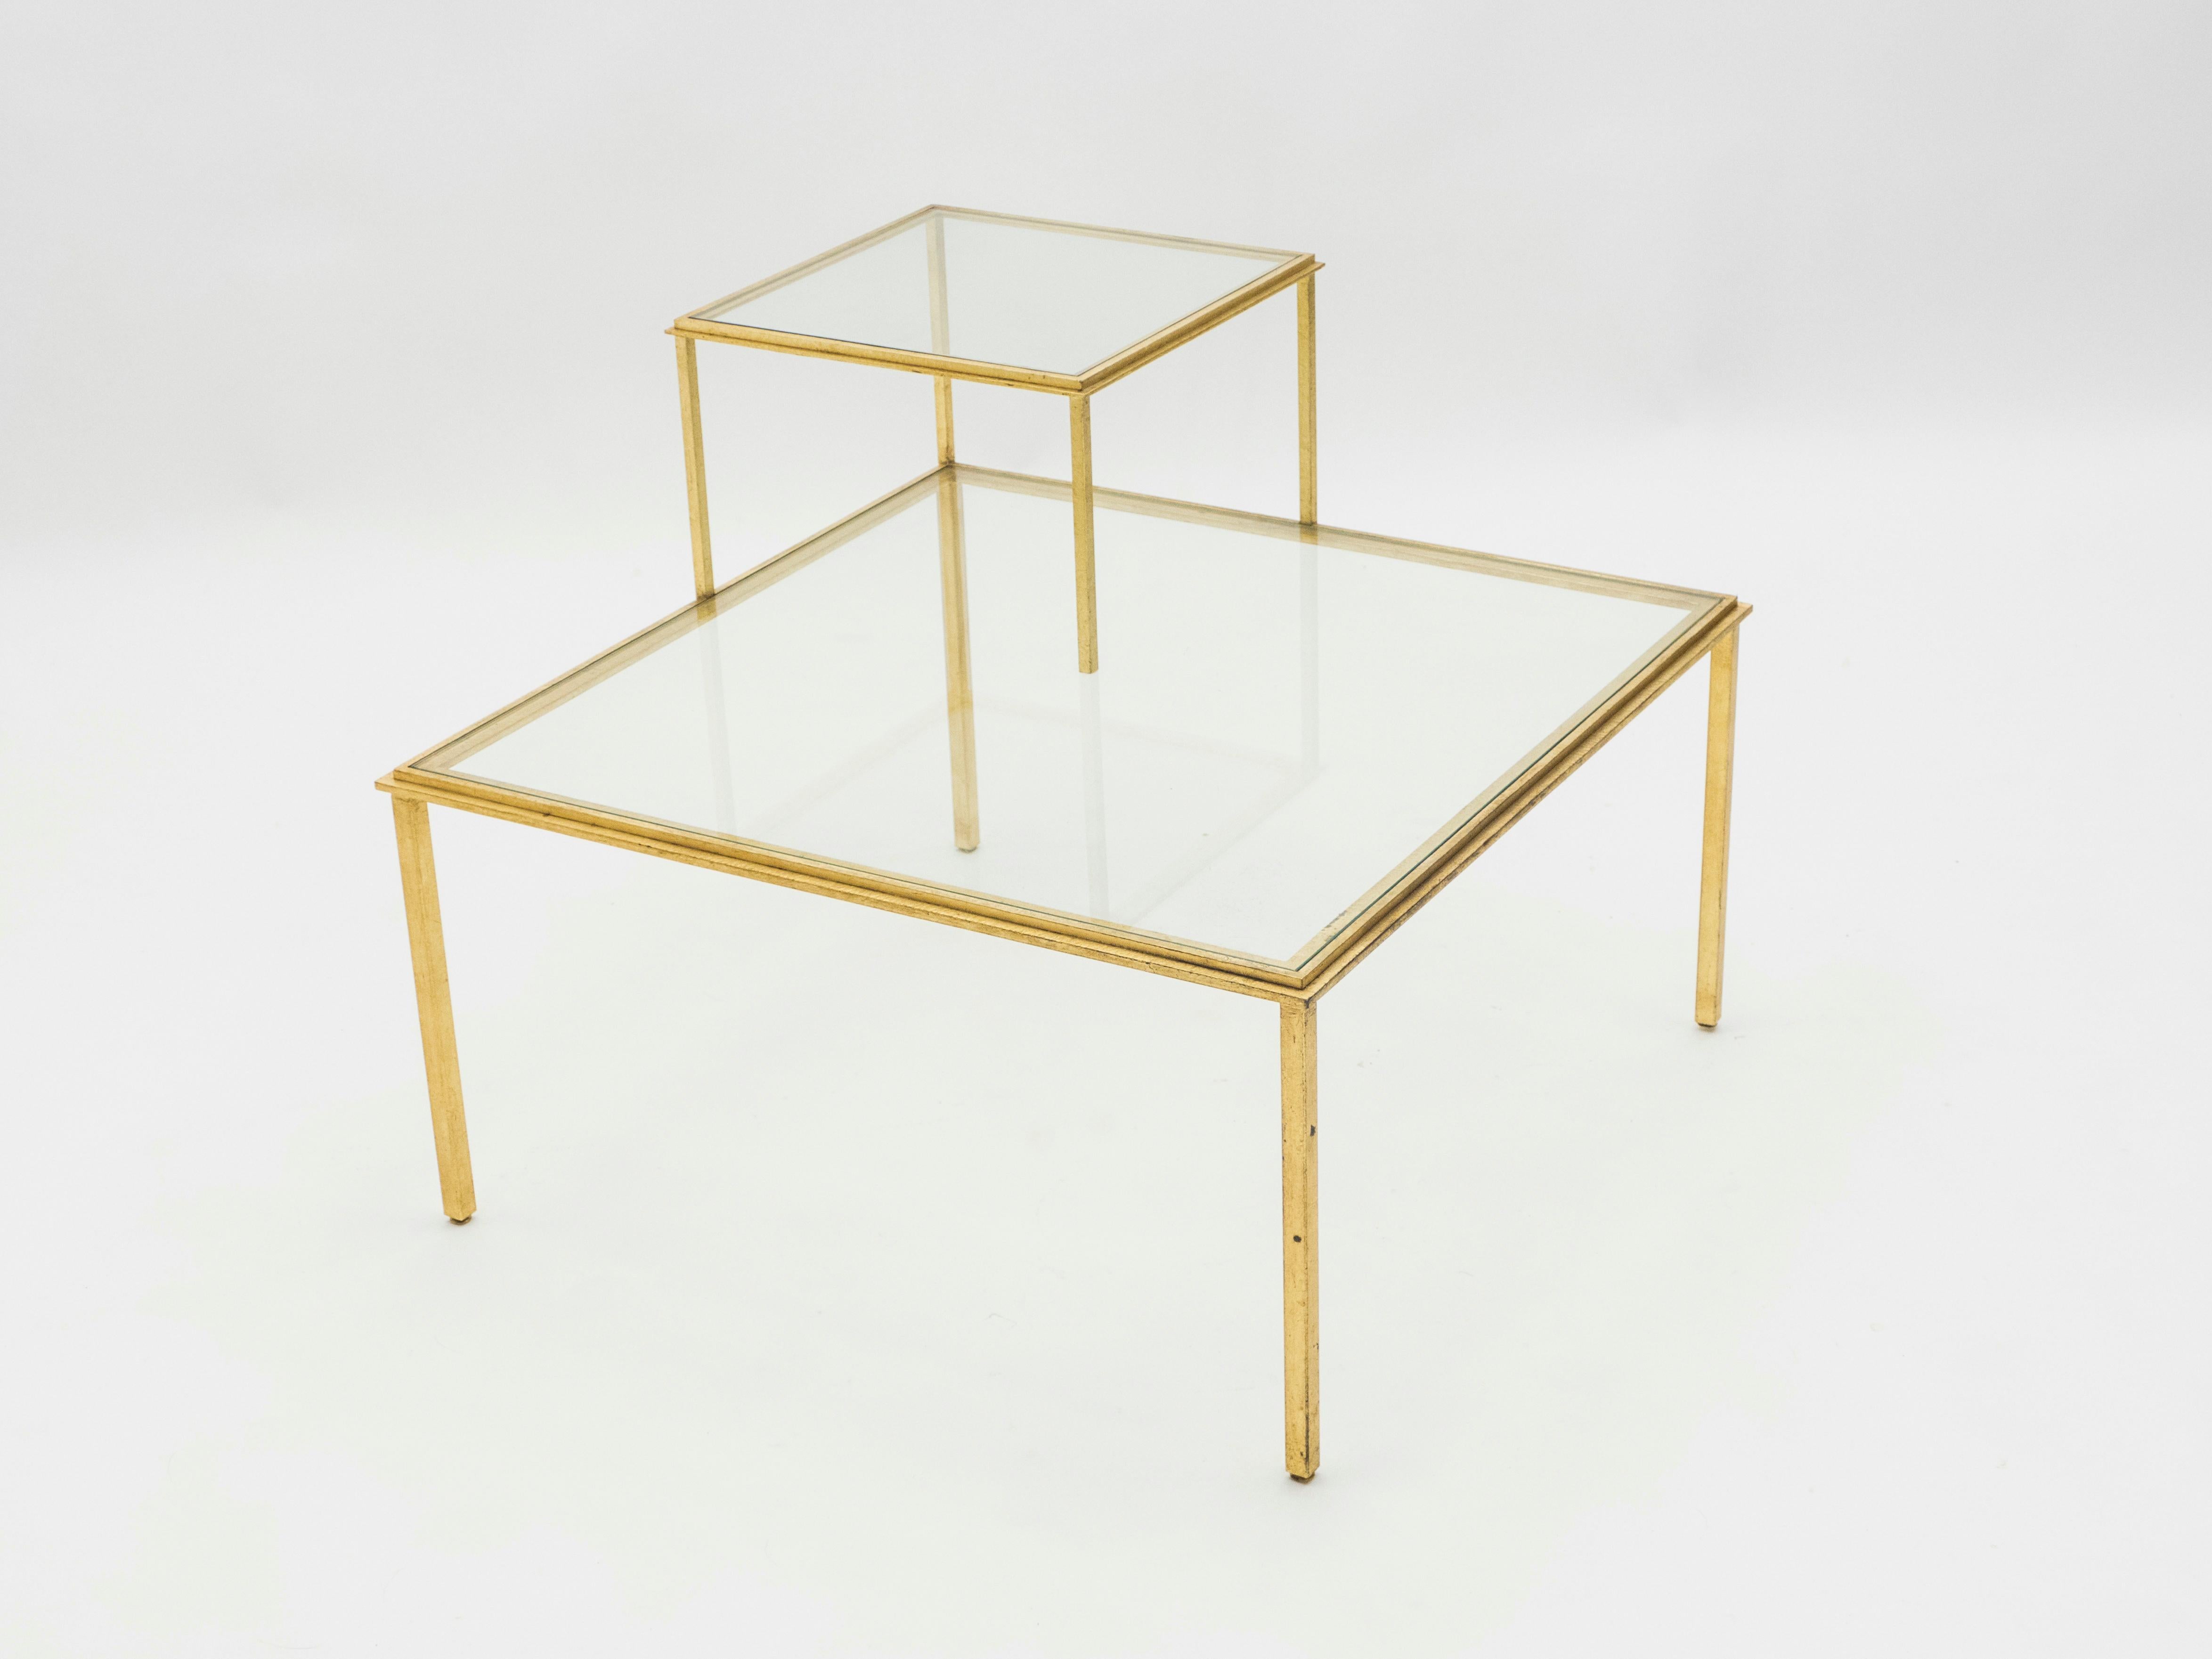 French Roger Thibier Gilt Wrought Iron Glass Coffee or End Table, 1960s For Sale